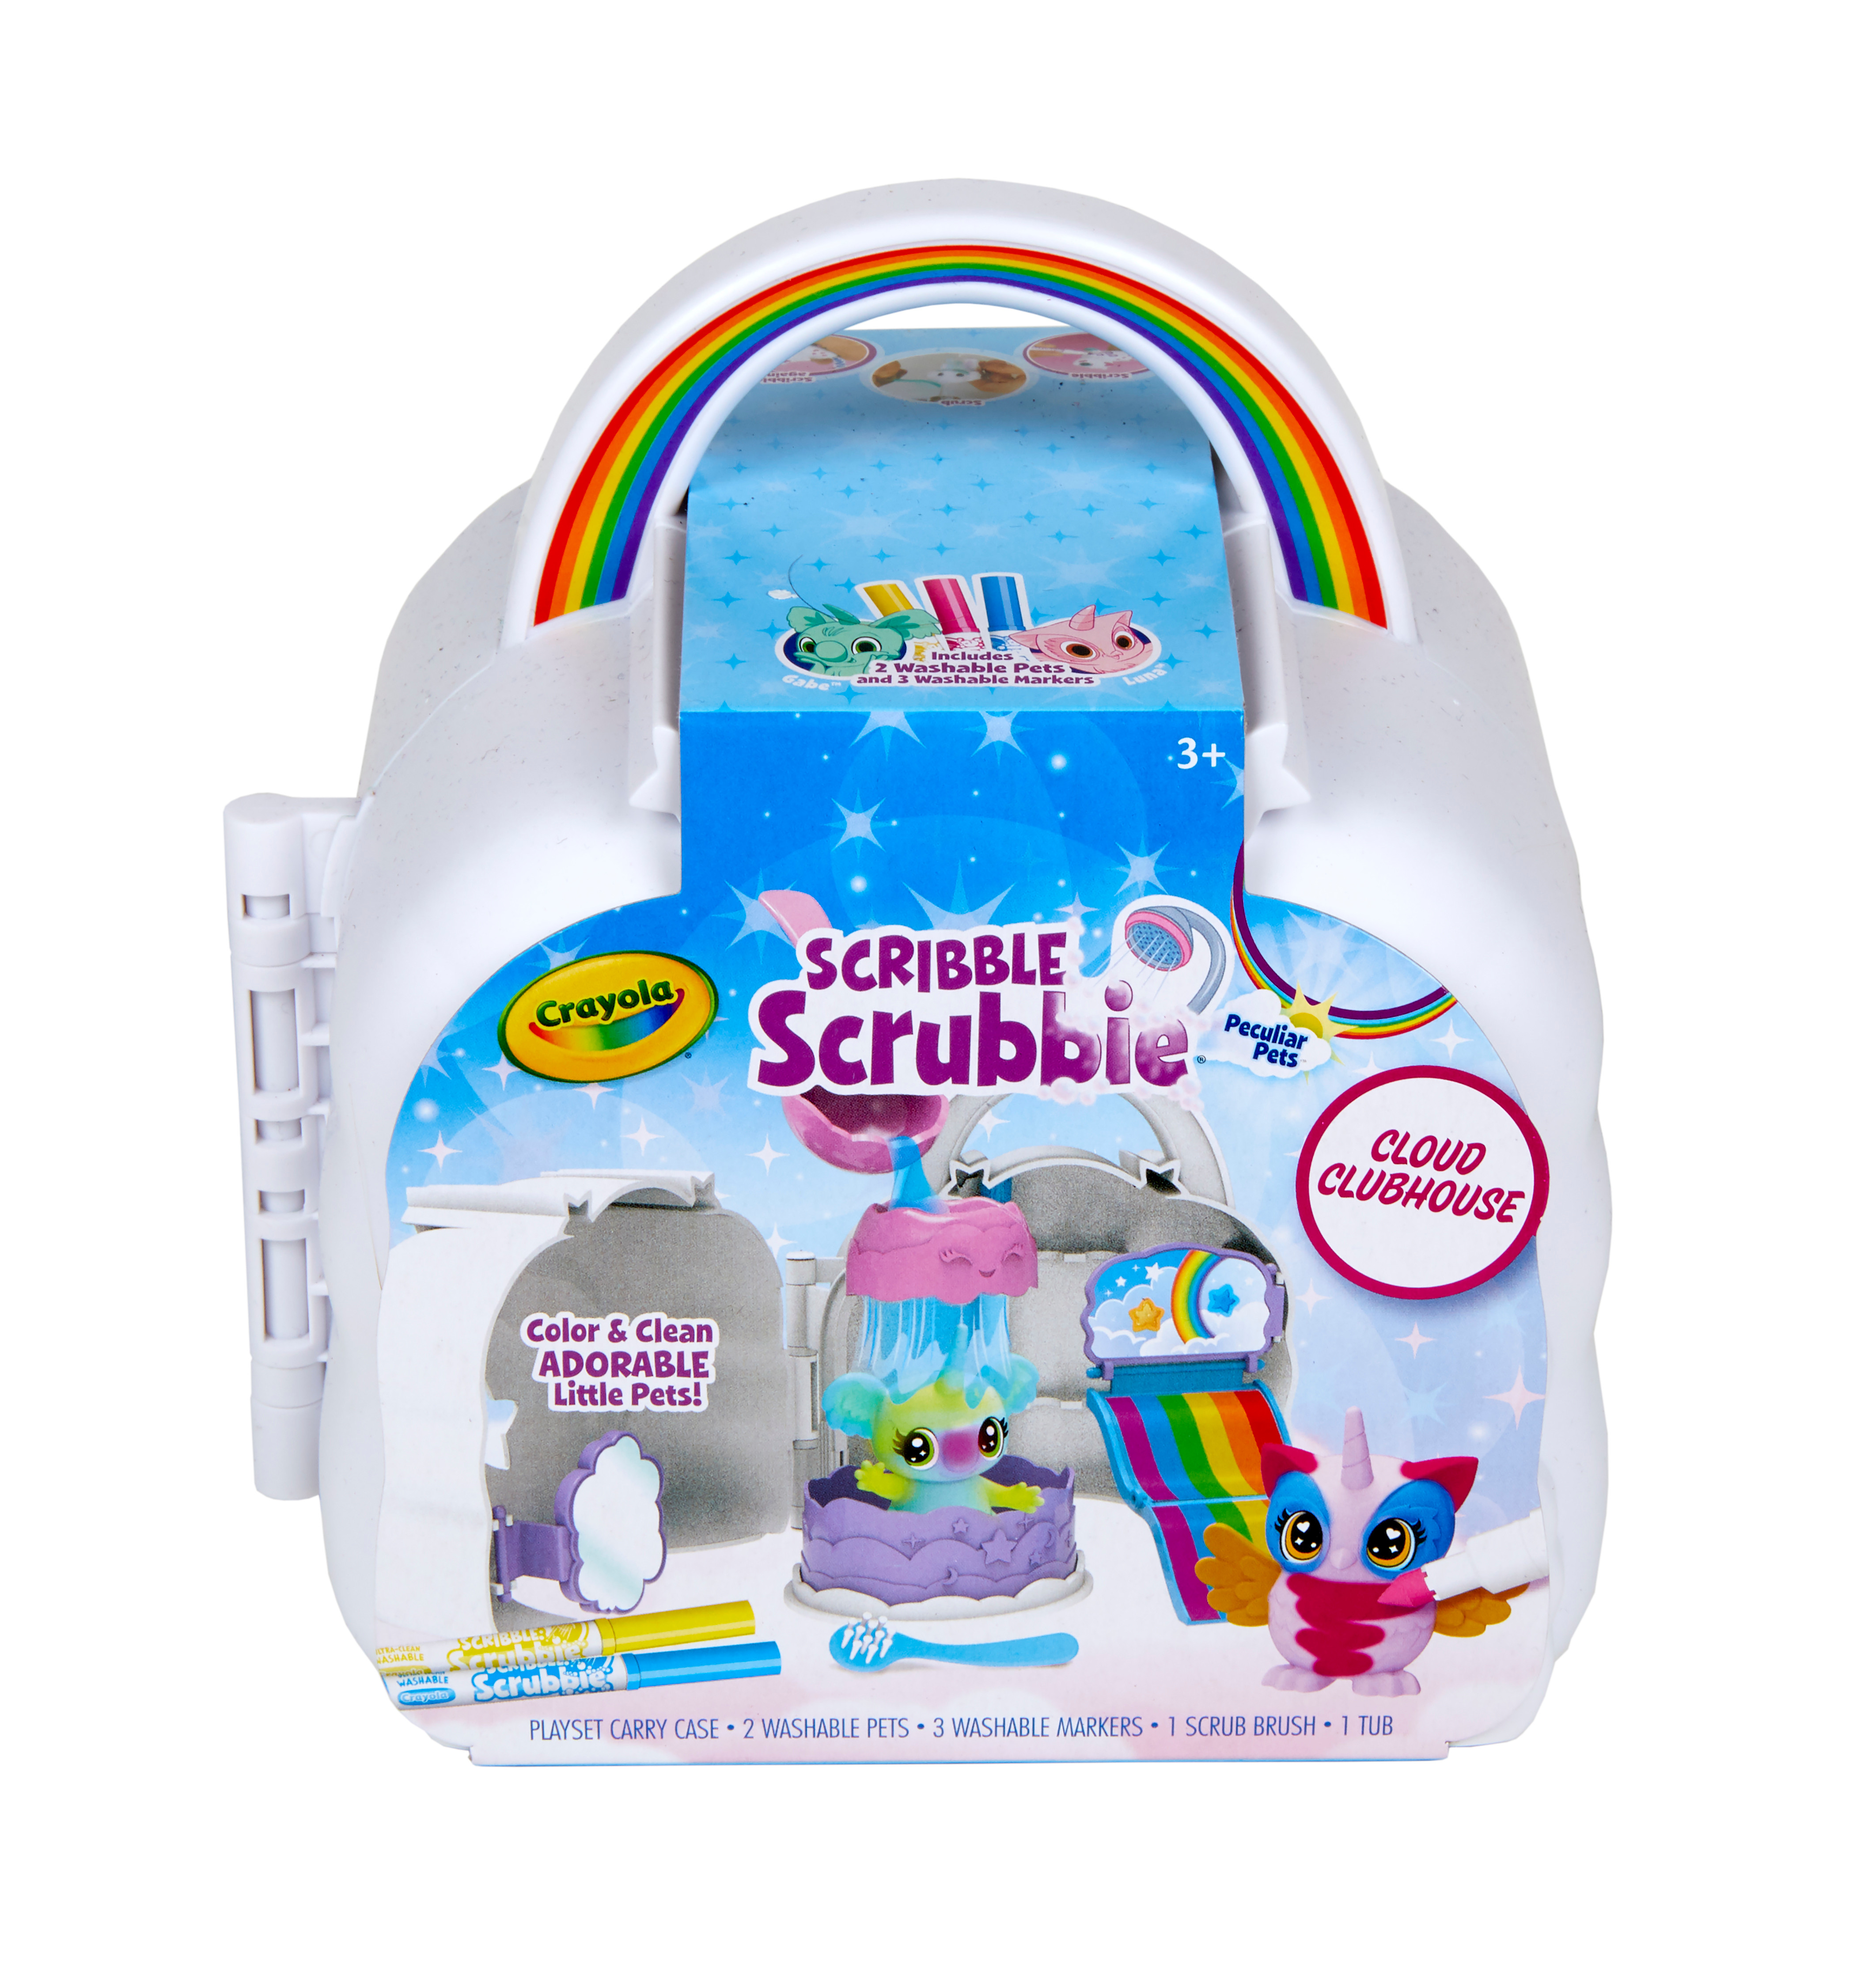 Crayola Scribble Scrubbie Cloud Clubhouse, Coloring Toys, Gifts, Beginner Unisex Child, 8 Pcs - image 8 of 10